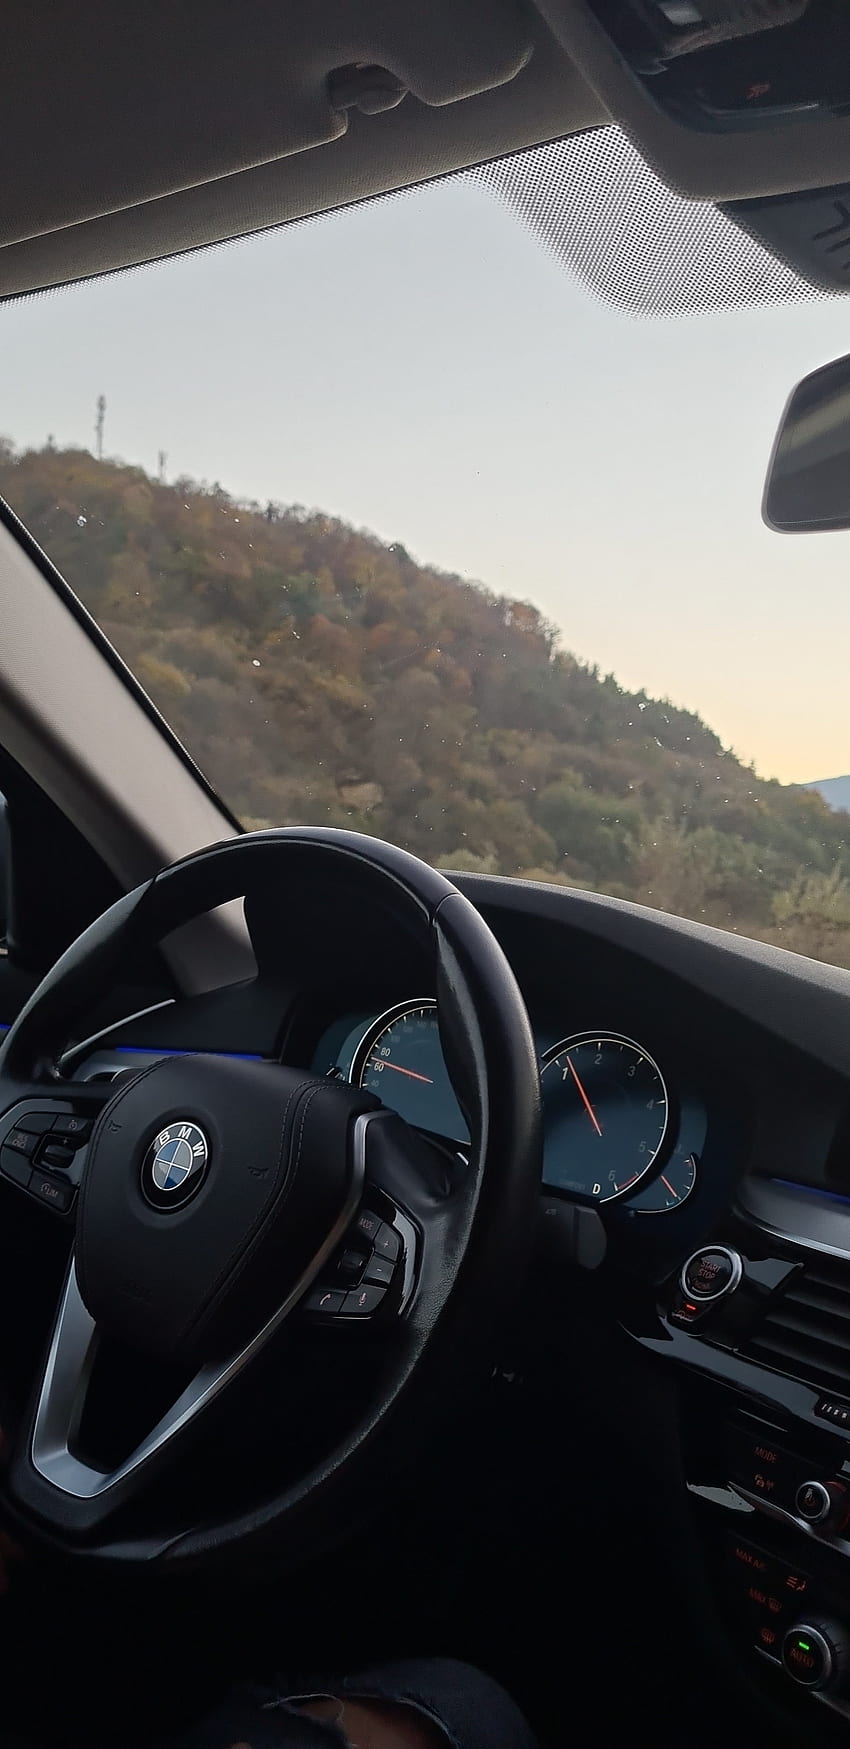 A car dashboard with a hill in the background. - BMW